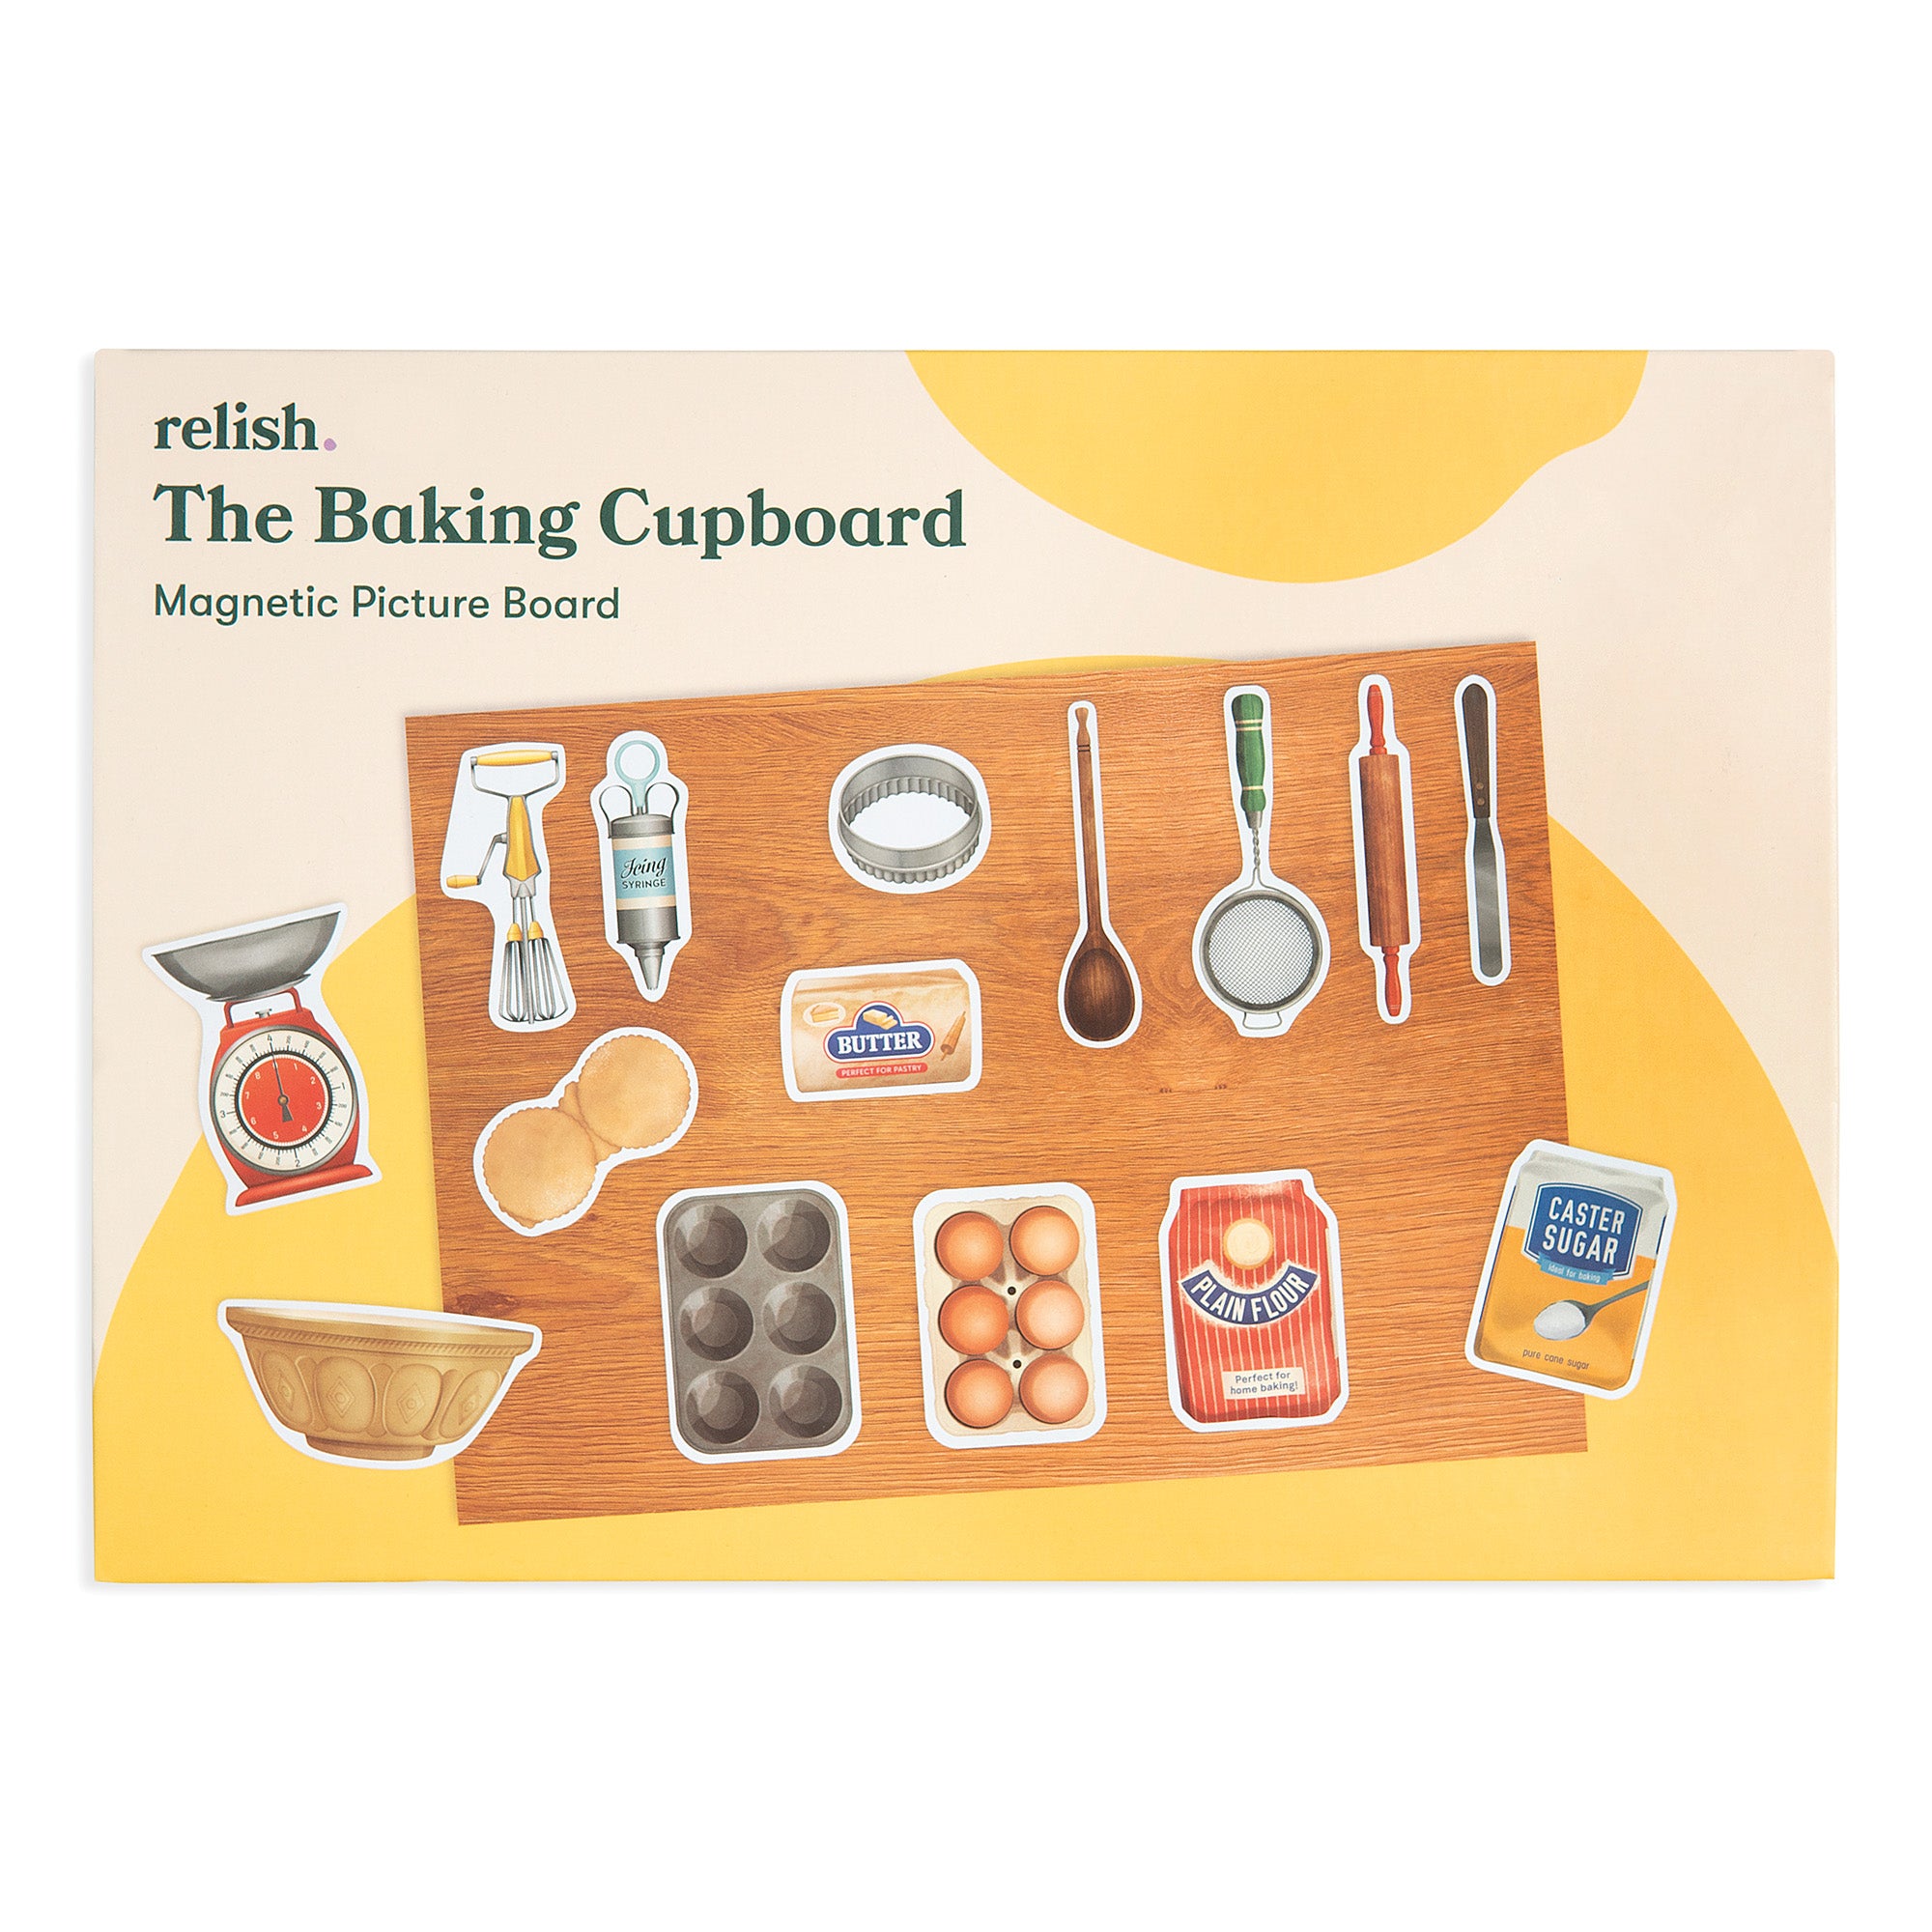 The Baking Cupboard reminiscence